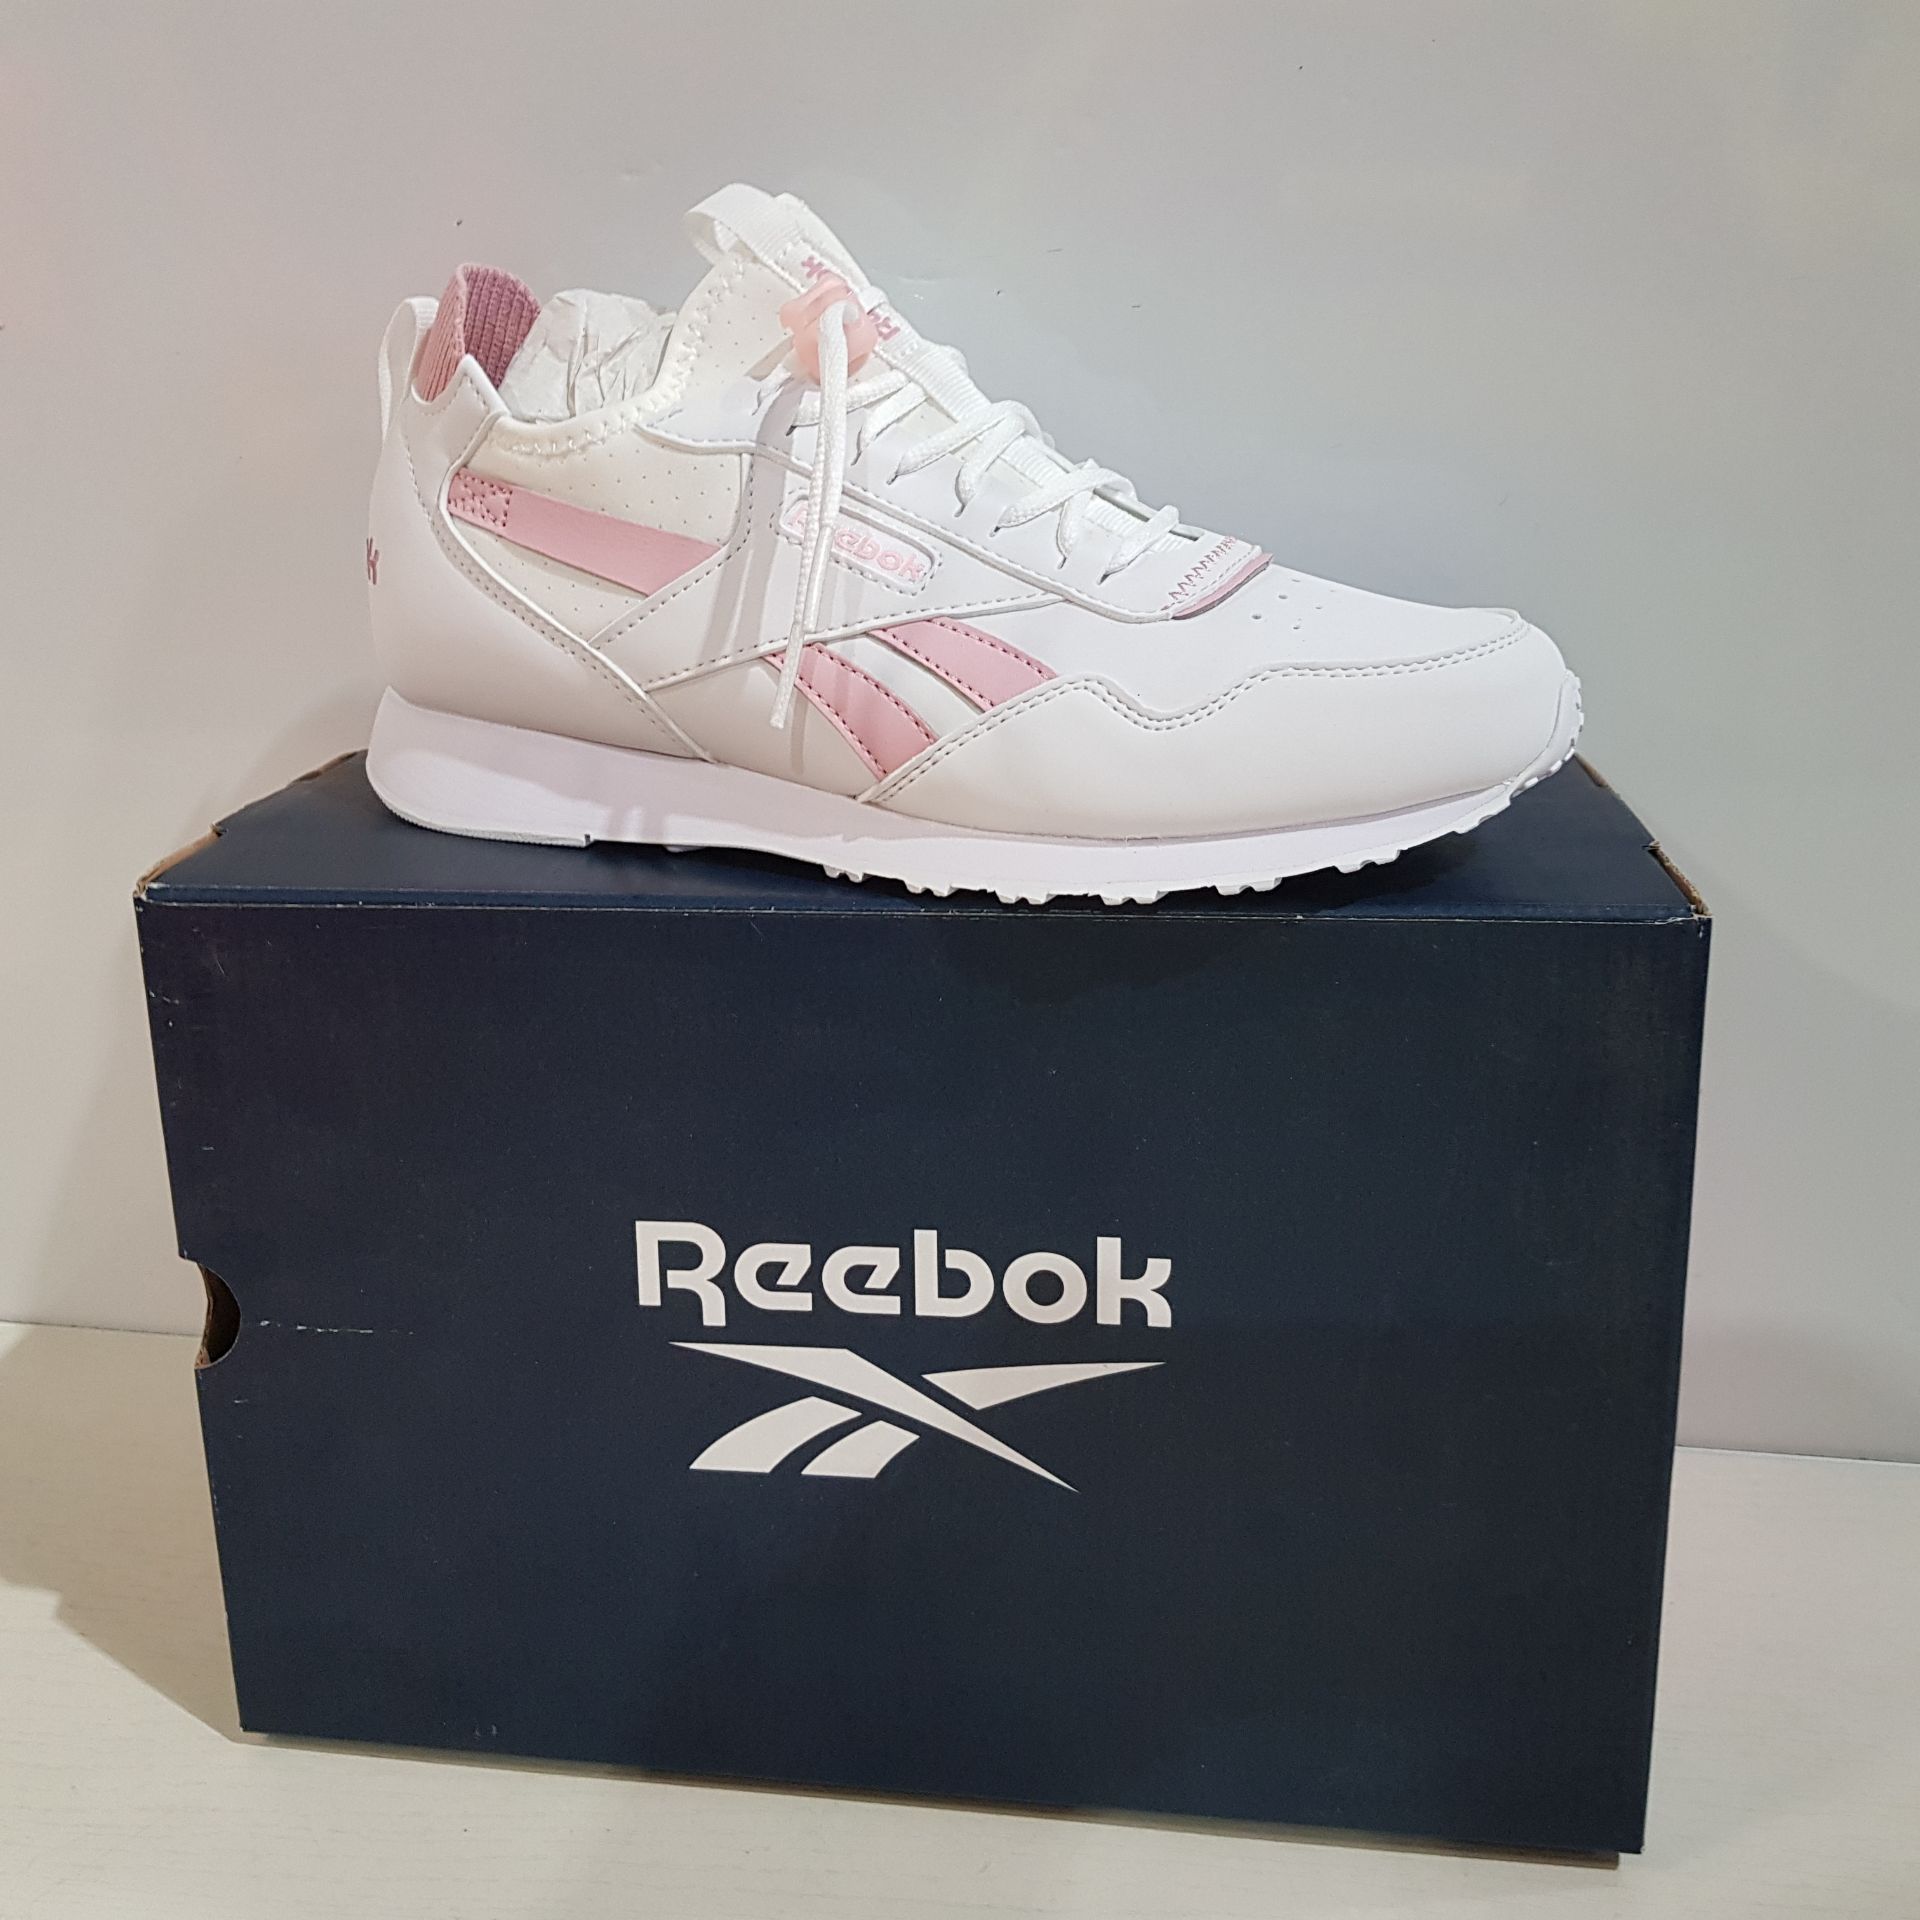 5 X BRAND NEW & BOXED REEBOK ROYAL GLIDE AC SHOES IN WHITE AND PINK - ALL IN SIZE UK 5